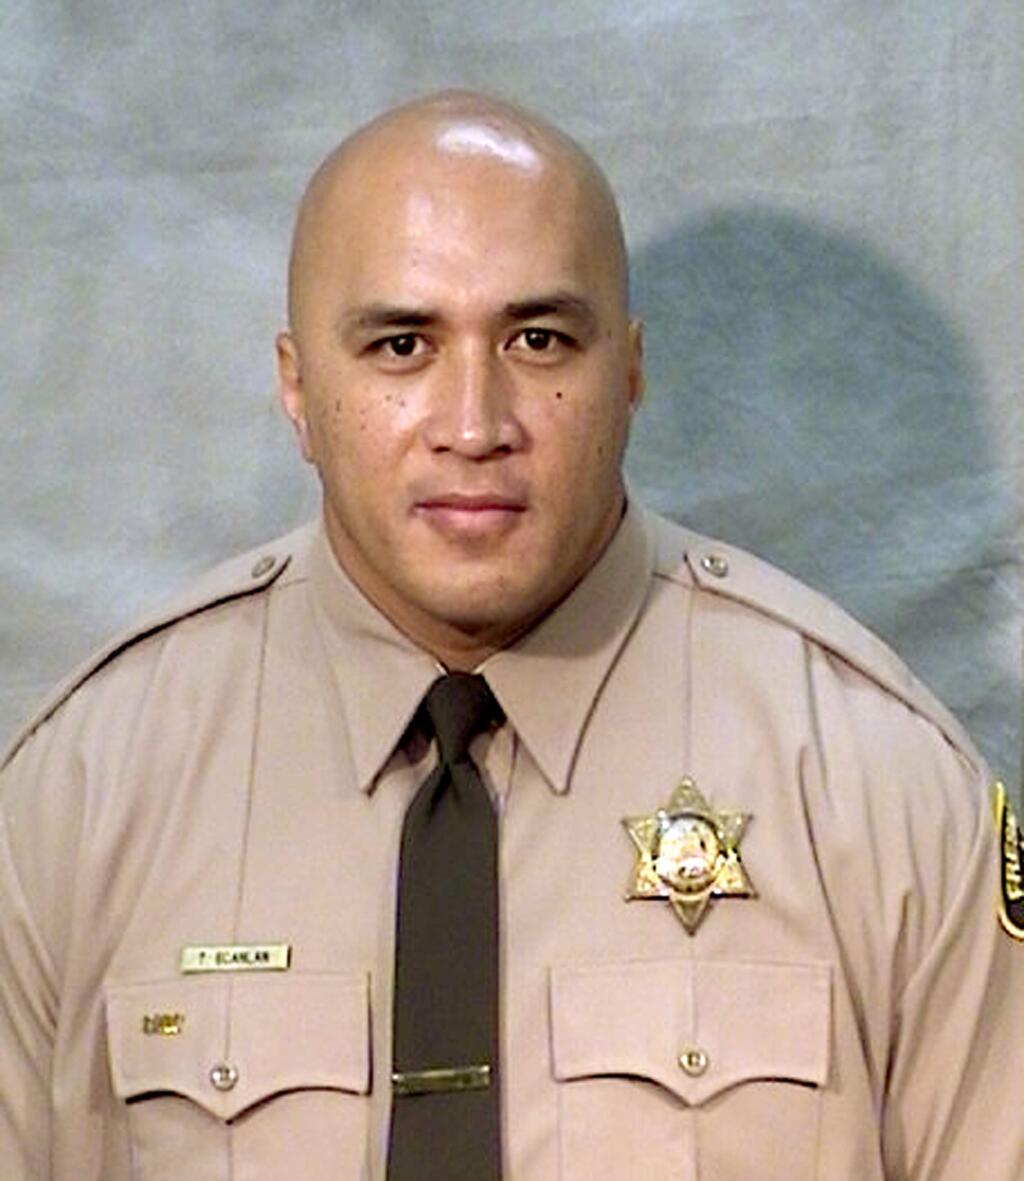 This undated photo provided by the Fresno County Sheriff's Office shows corrections officer Toamalama Scanlan. He was one of two unarmed officers critically injured after a man opened fire in the main lobby of the Fresno County Jail in downtown Fresno, Calif., Saturday, Sept. 3, 2016. Authorities said officers from the secured areas inside the jail ran to the lobby, where a lieutenant fired shots at the gunman, identified as 37-year-old Thong Vang, who was taken into custody. The injured officers were dragged out of the lobby and taken to the hospital to undergo surgery. (Fresno County Sheriff's Office via AP)